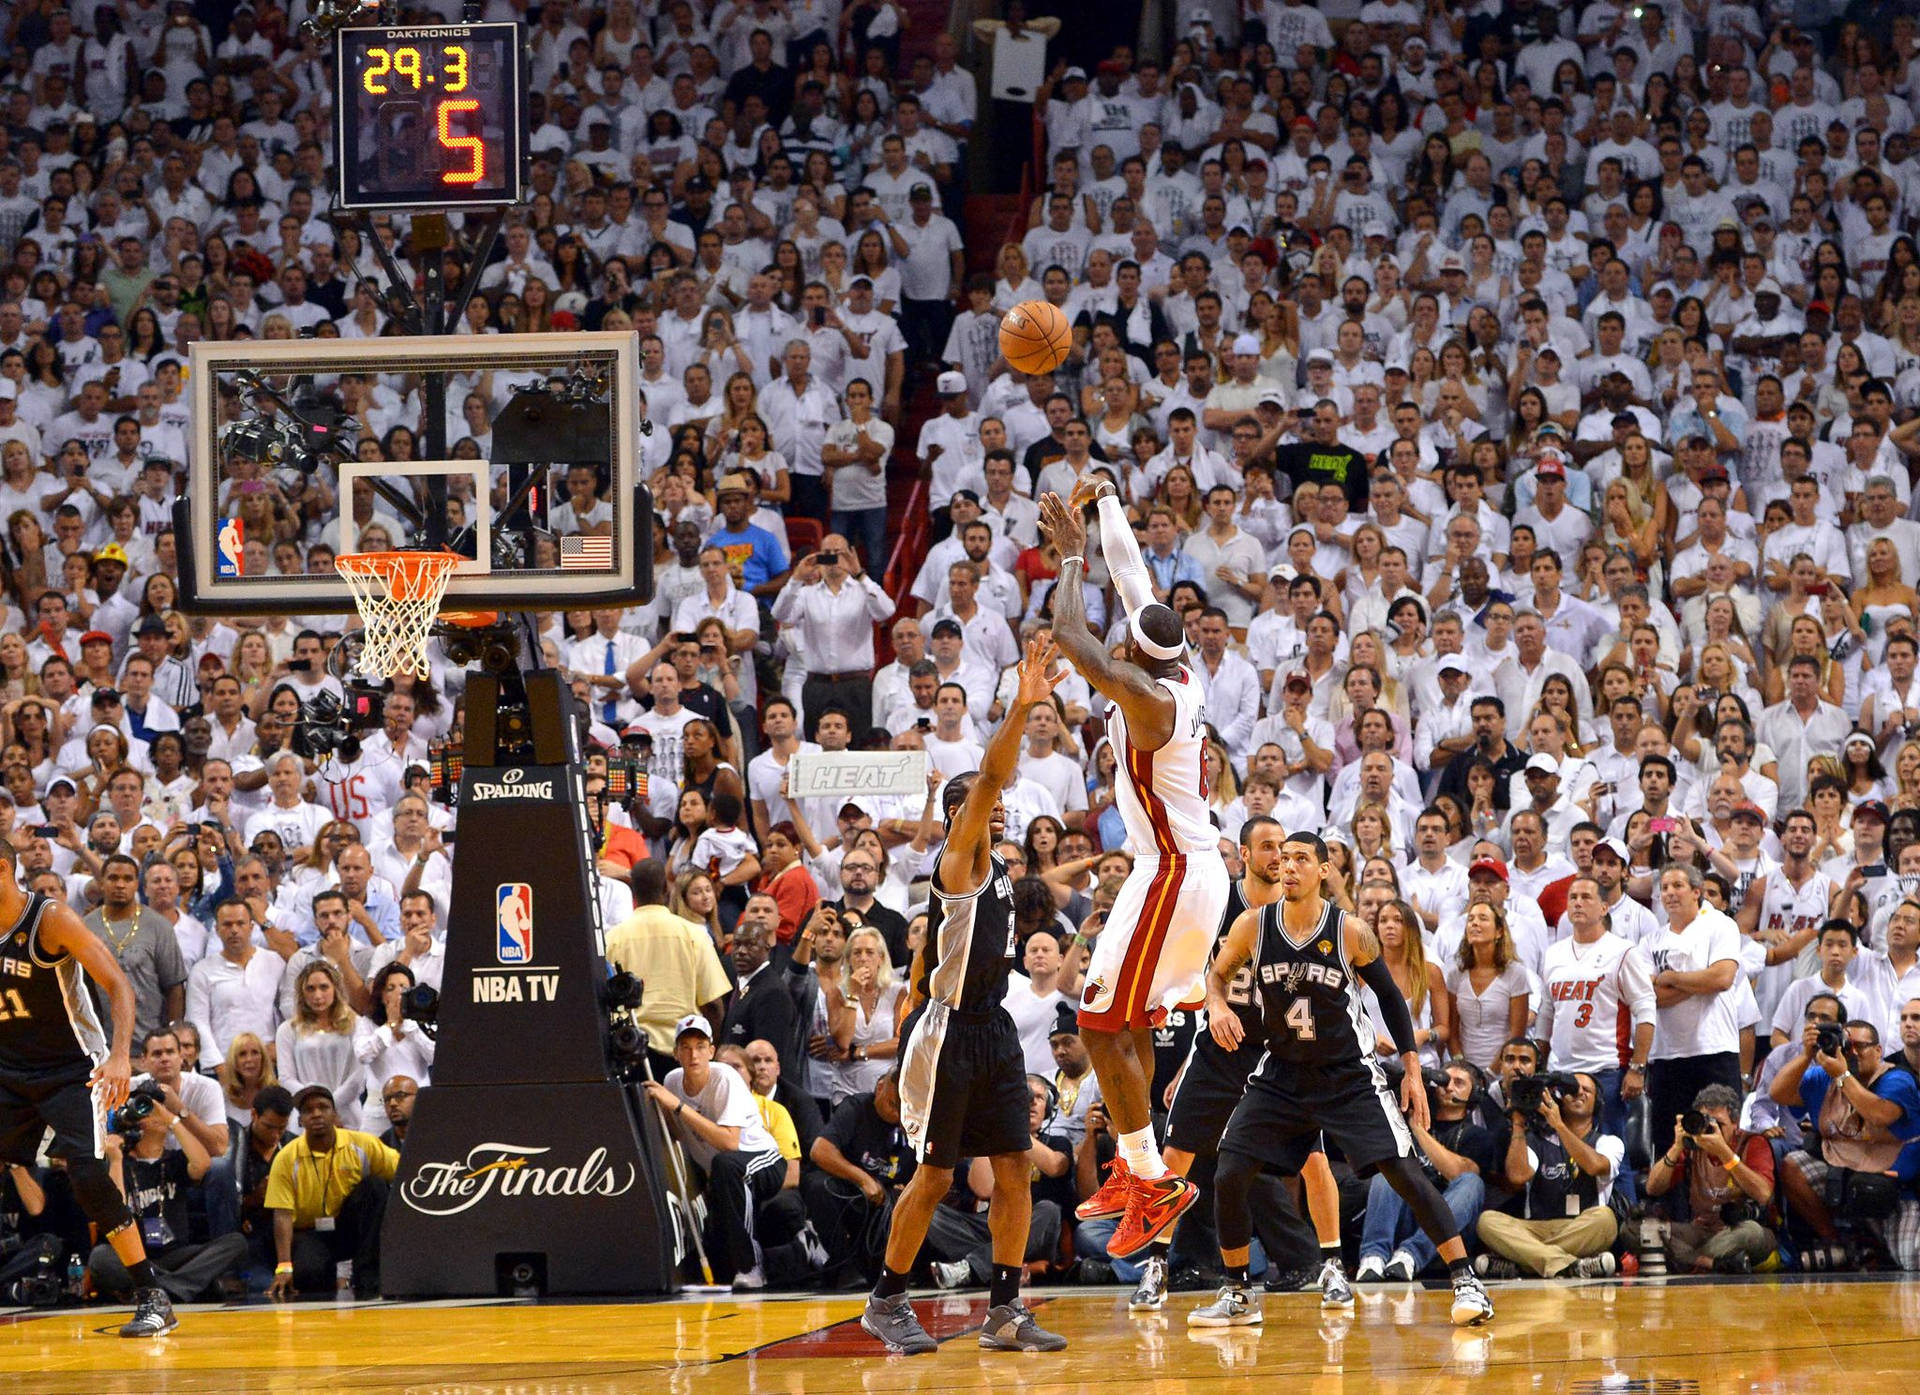 High-action Moment In Nba Finals